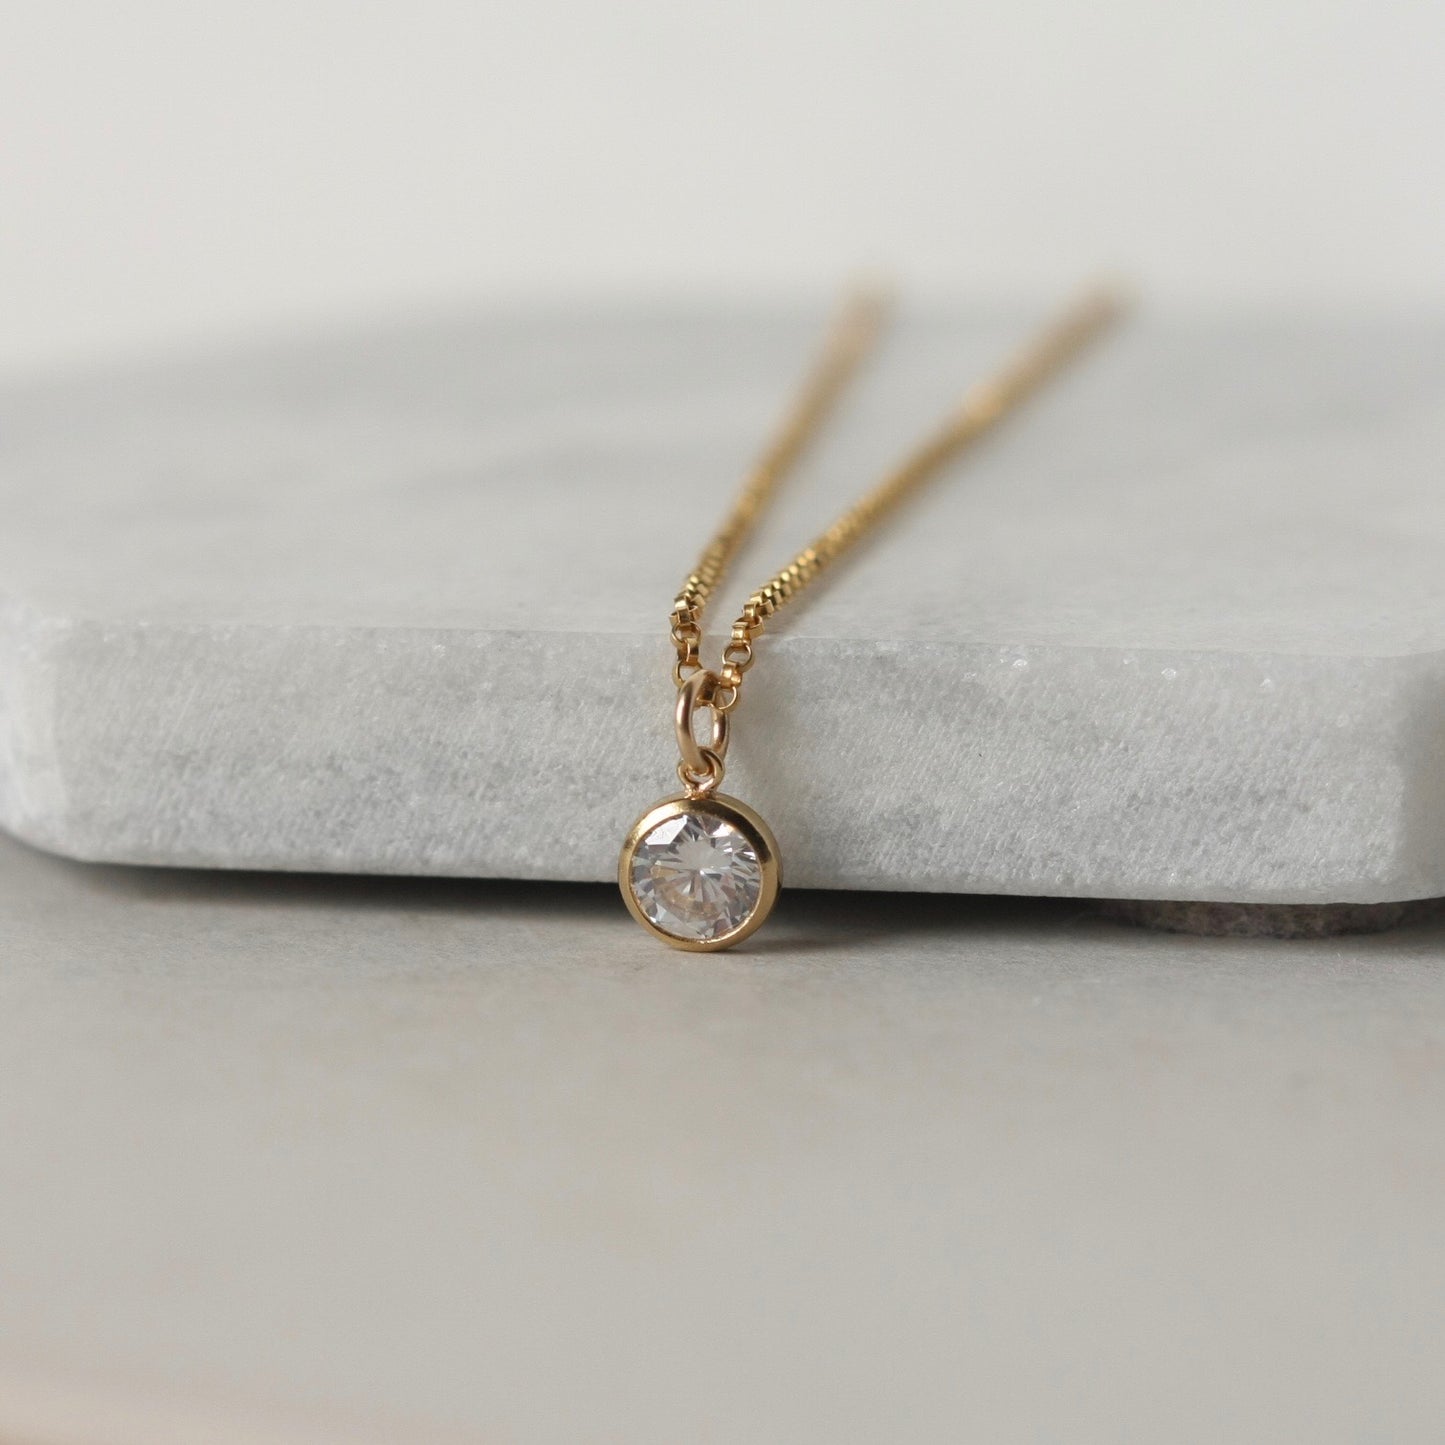 Gold CZ Sparkly Solitaire Charm Necklace